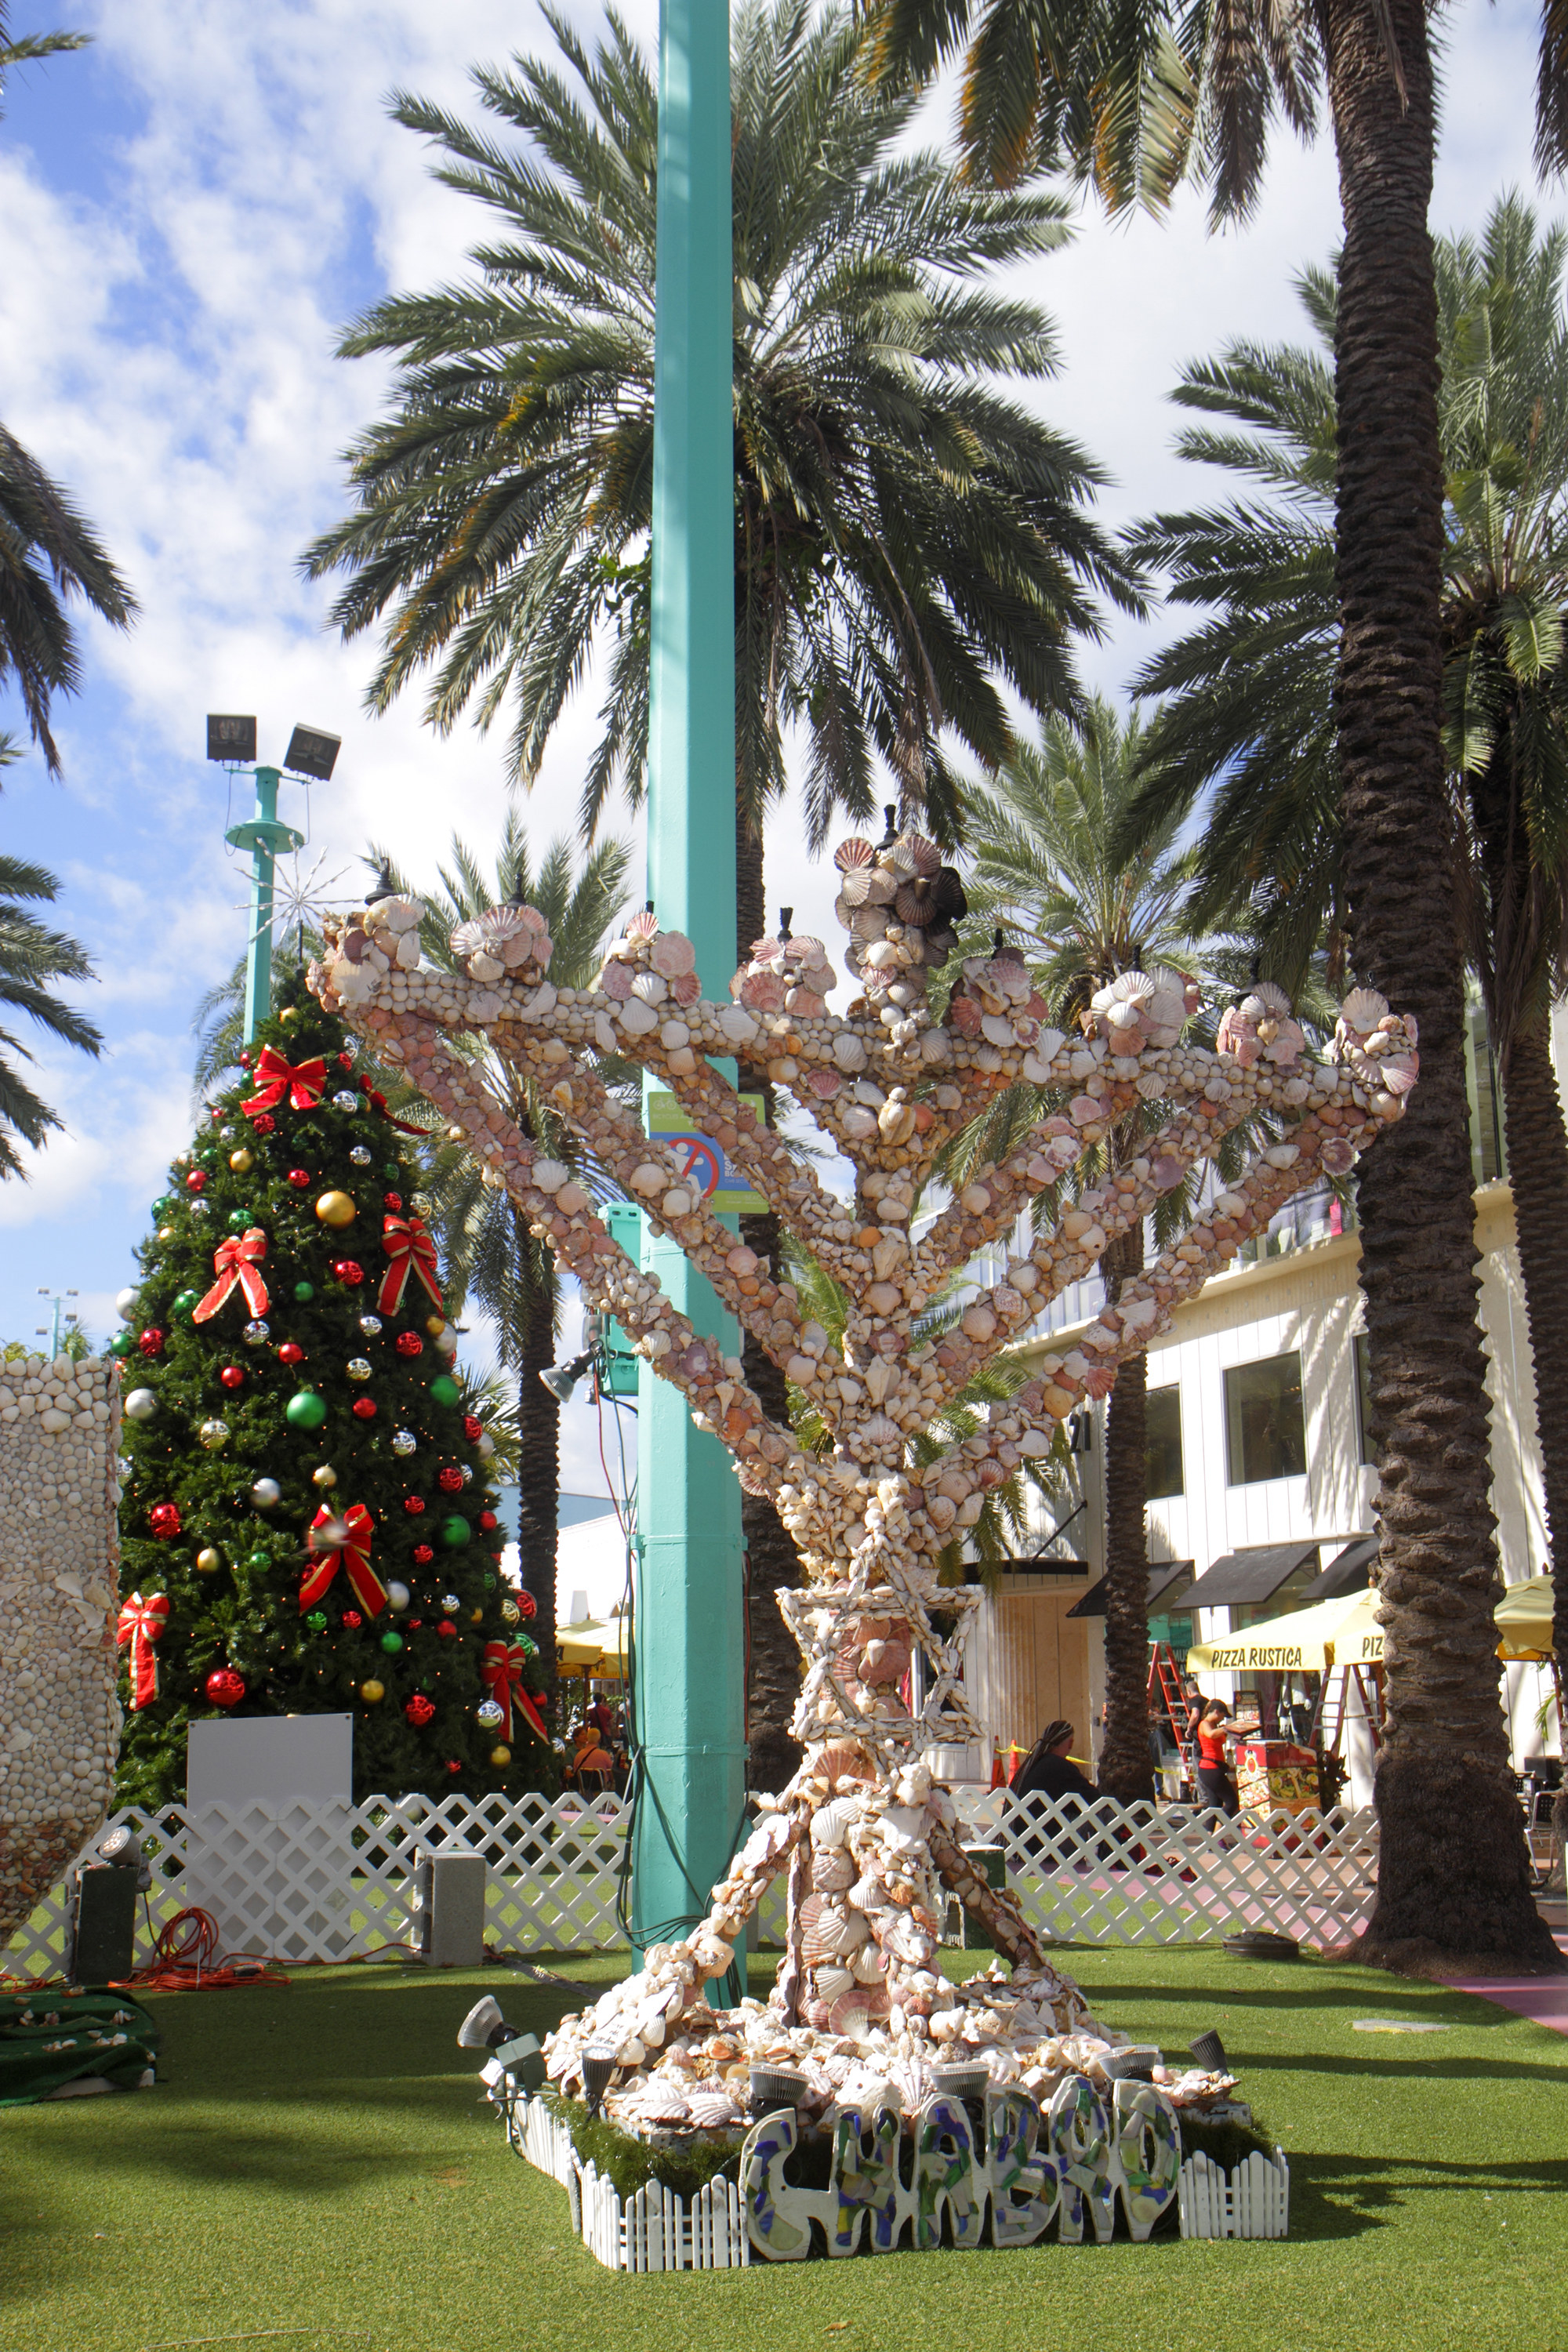 A menorah made of seashells sits below palm trees with a Christmas tree behind it